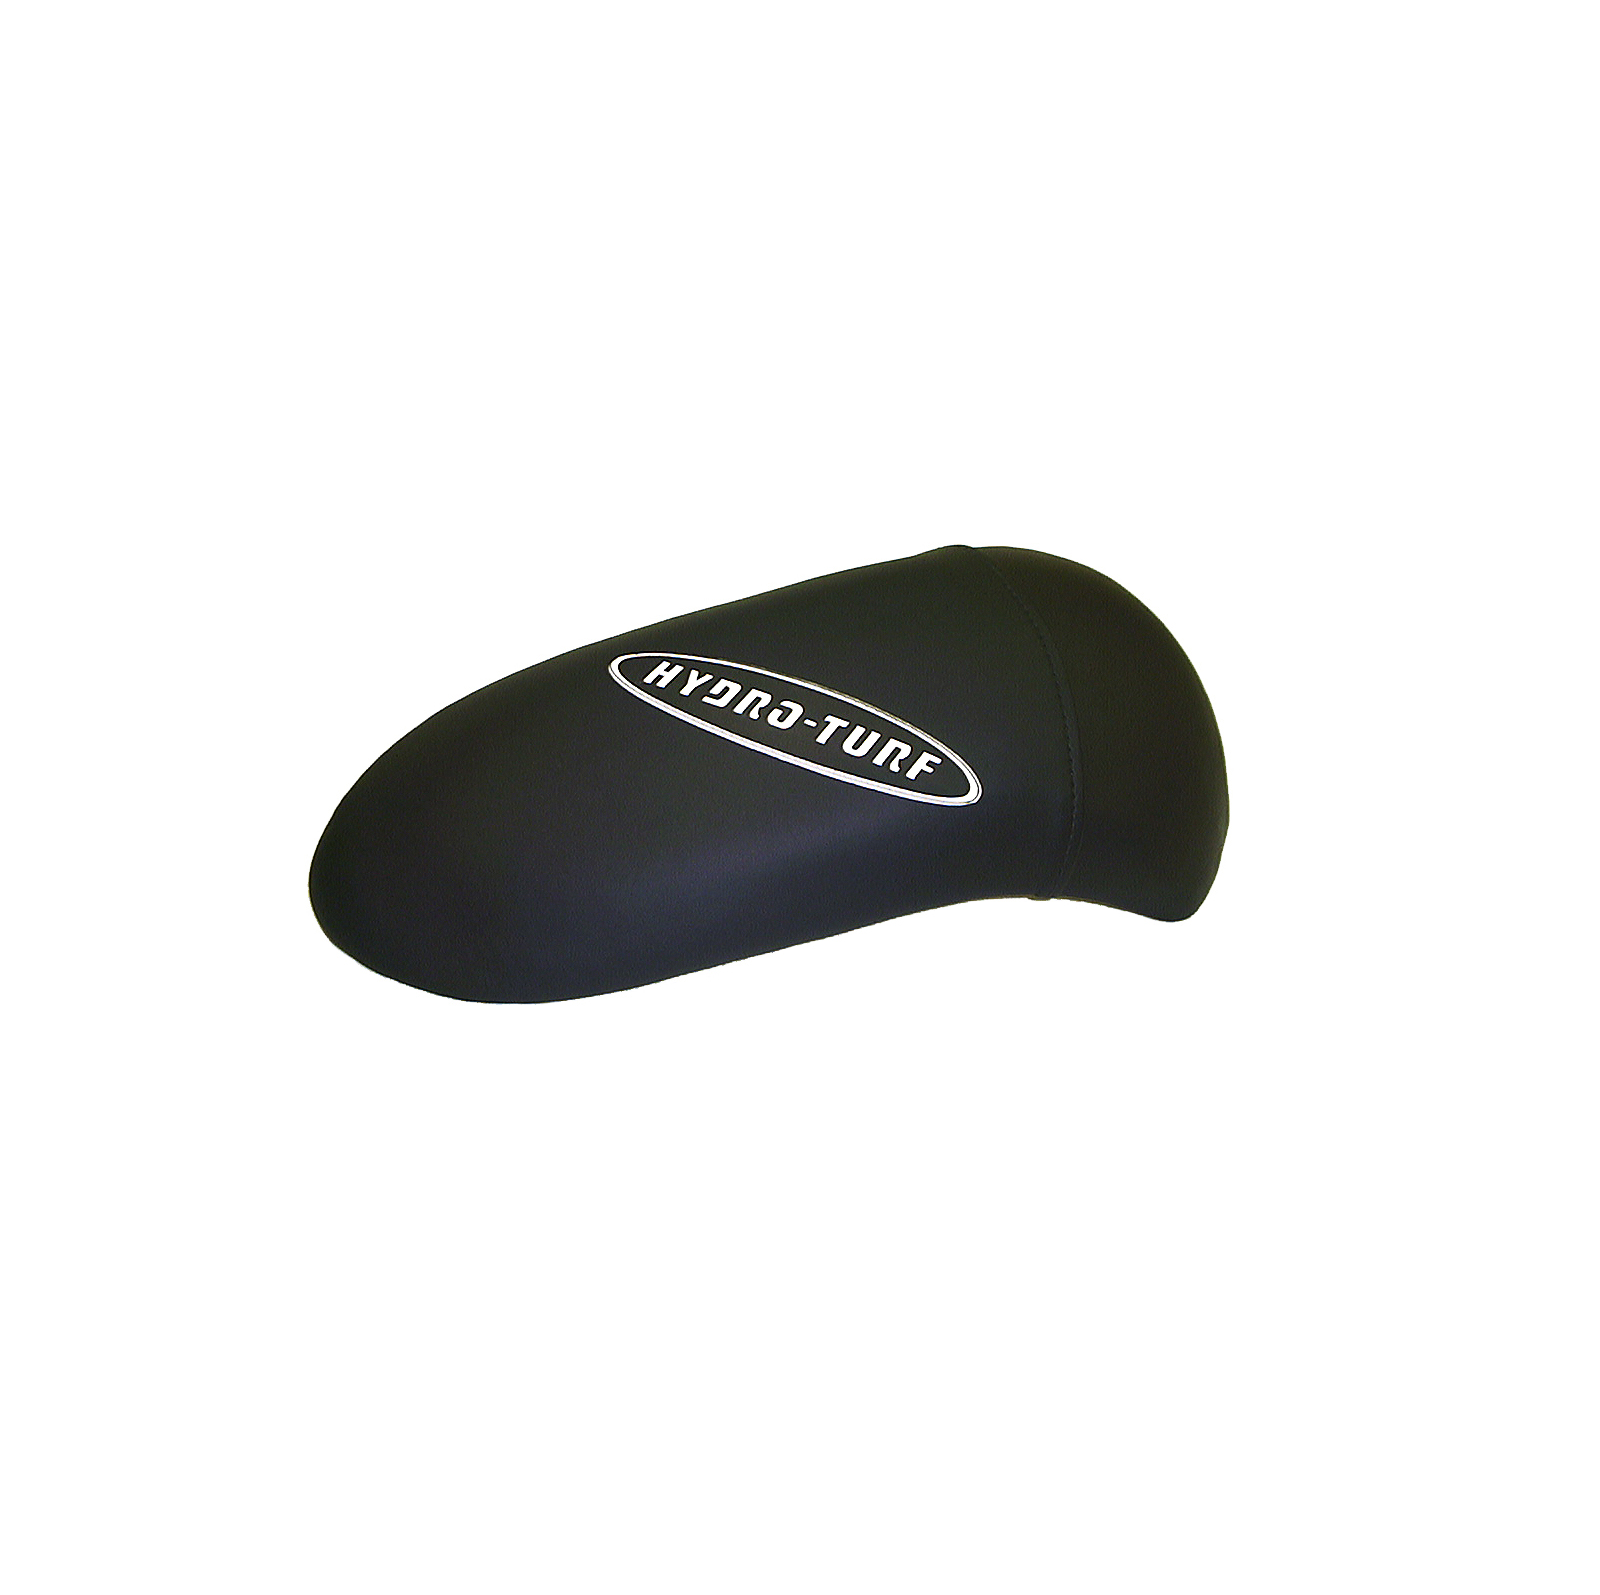 Hydro-Turf for 750SX Chin Pad Cover "Low Profile"  Colorway A